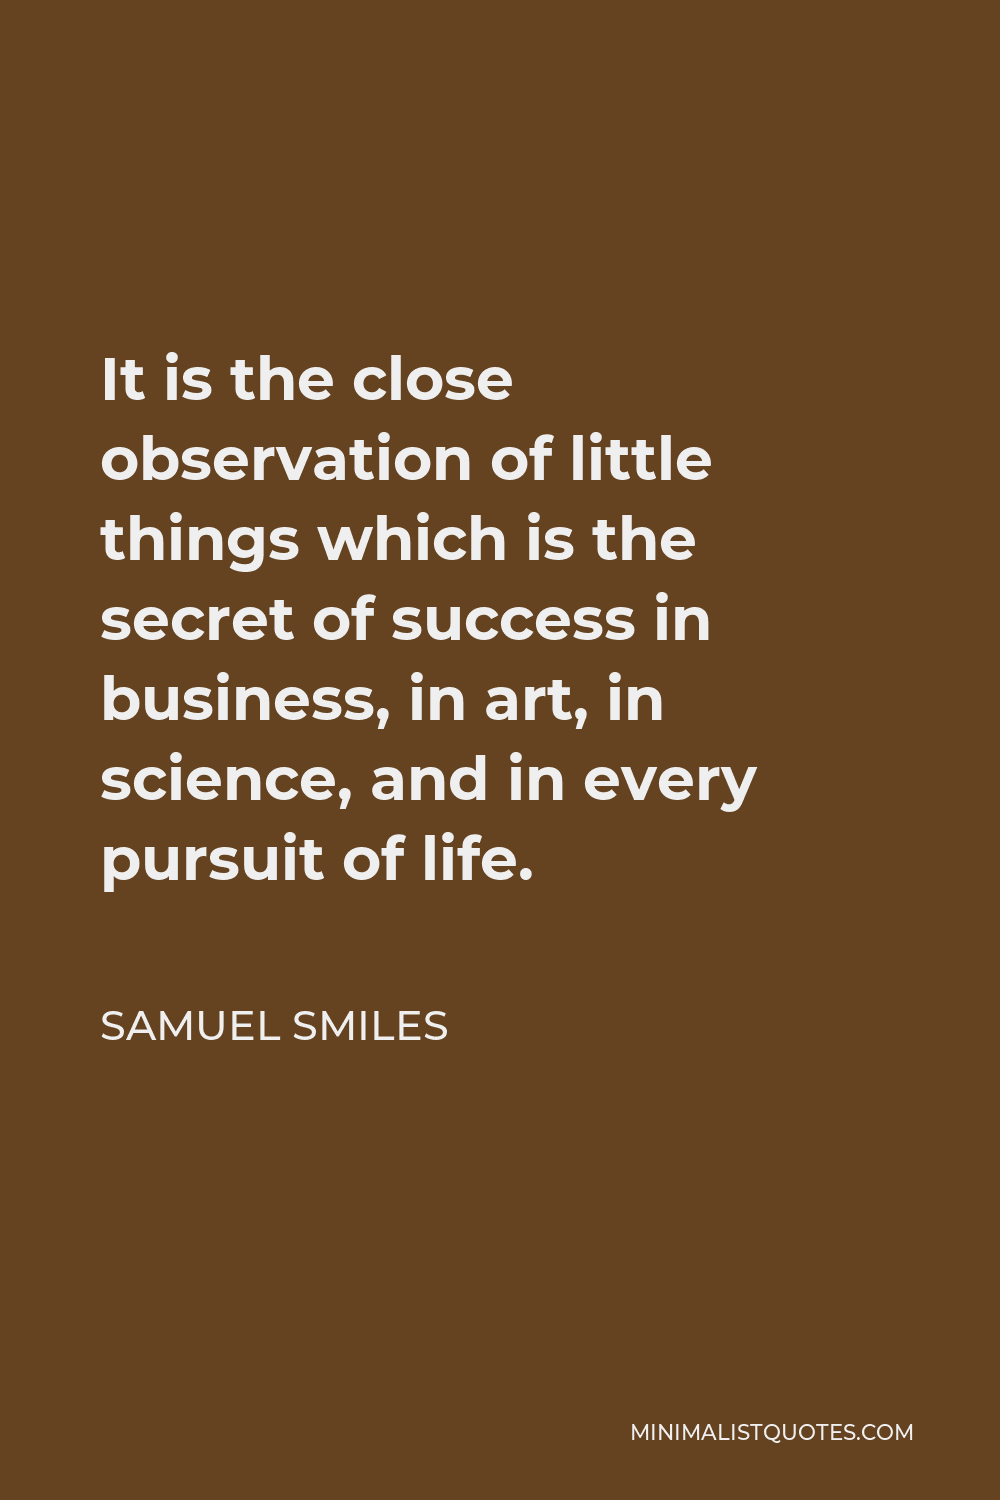 Samuel Smiles Quote - It is the close observation of little things which is the secret of success in business, in art, in science, and in every pursuit of life.